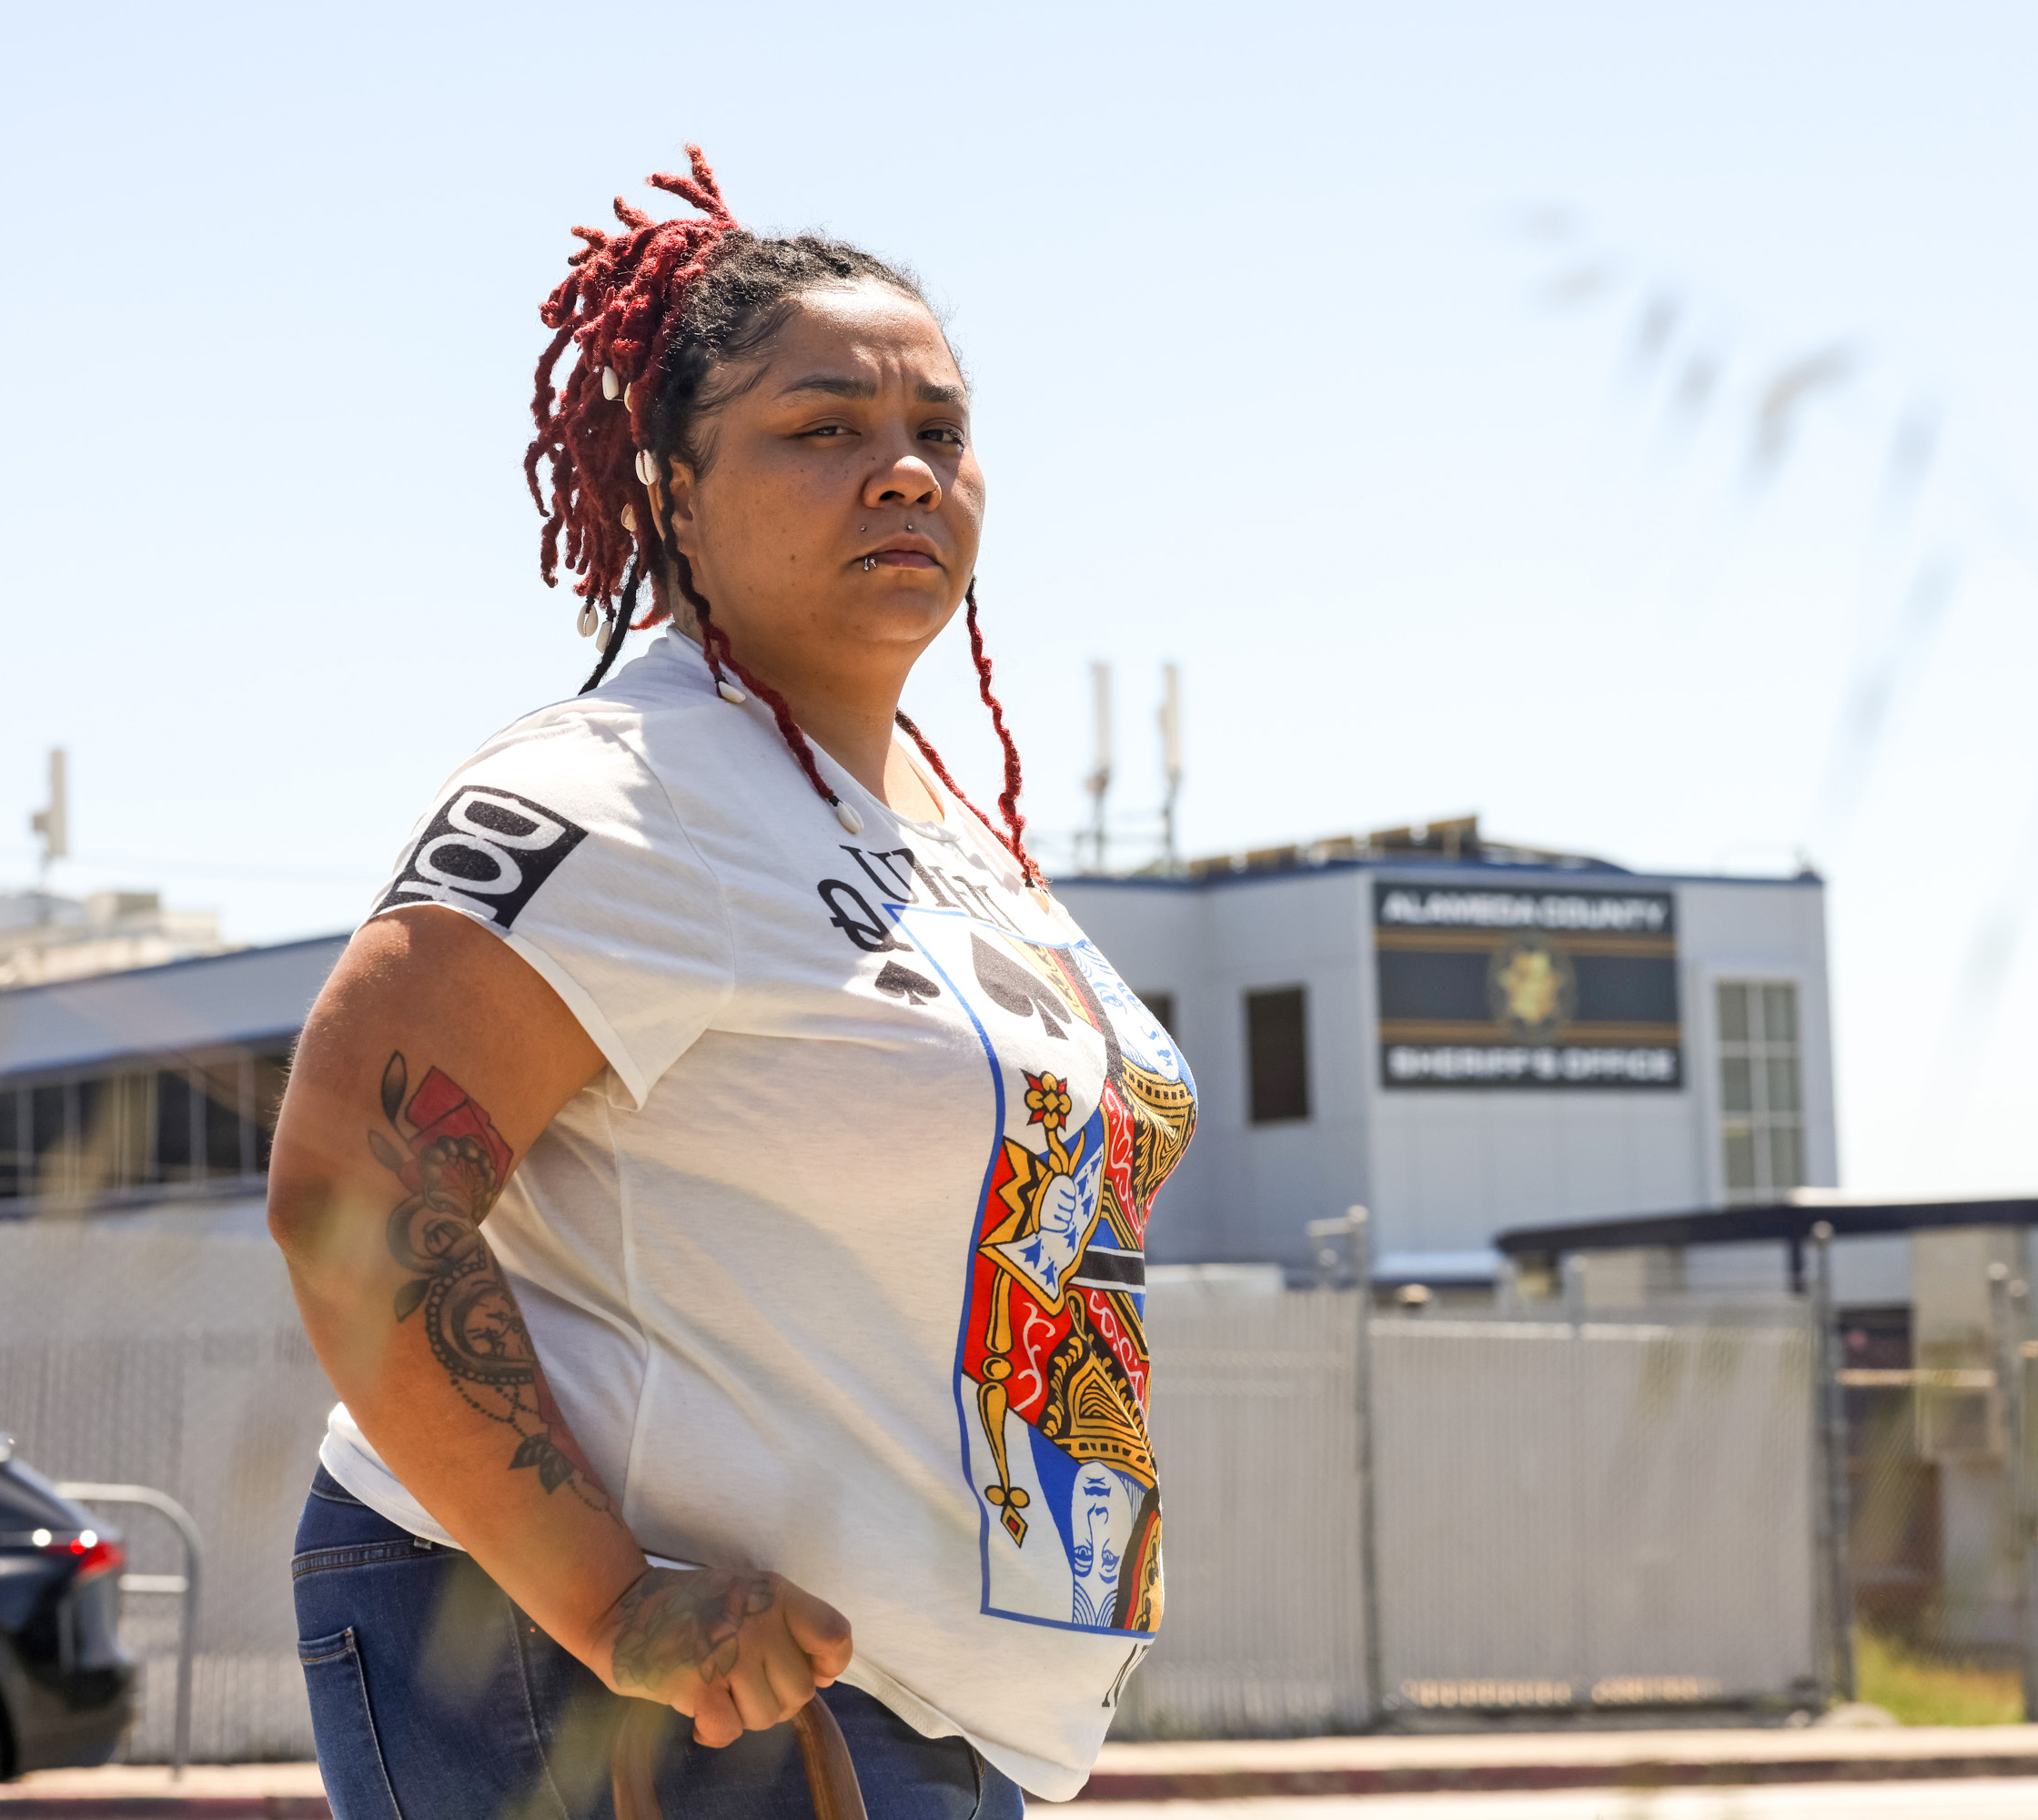 A person with red-tinged dreadlocks, tattoos, and a playing card t-shirt stands confidently outdoors.